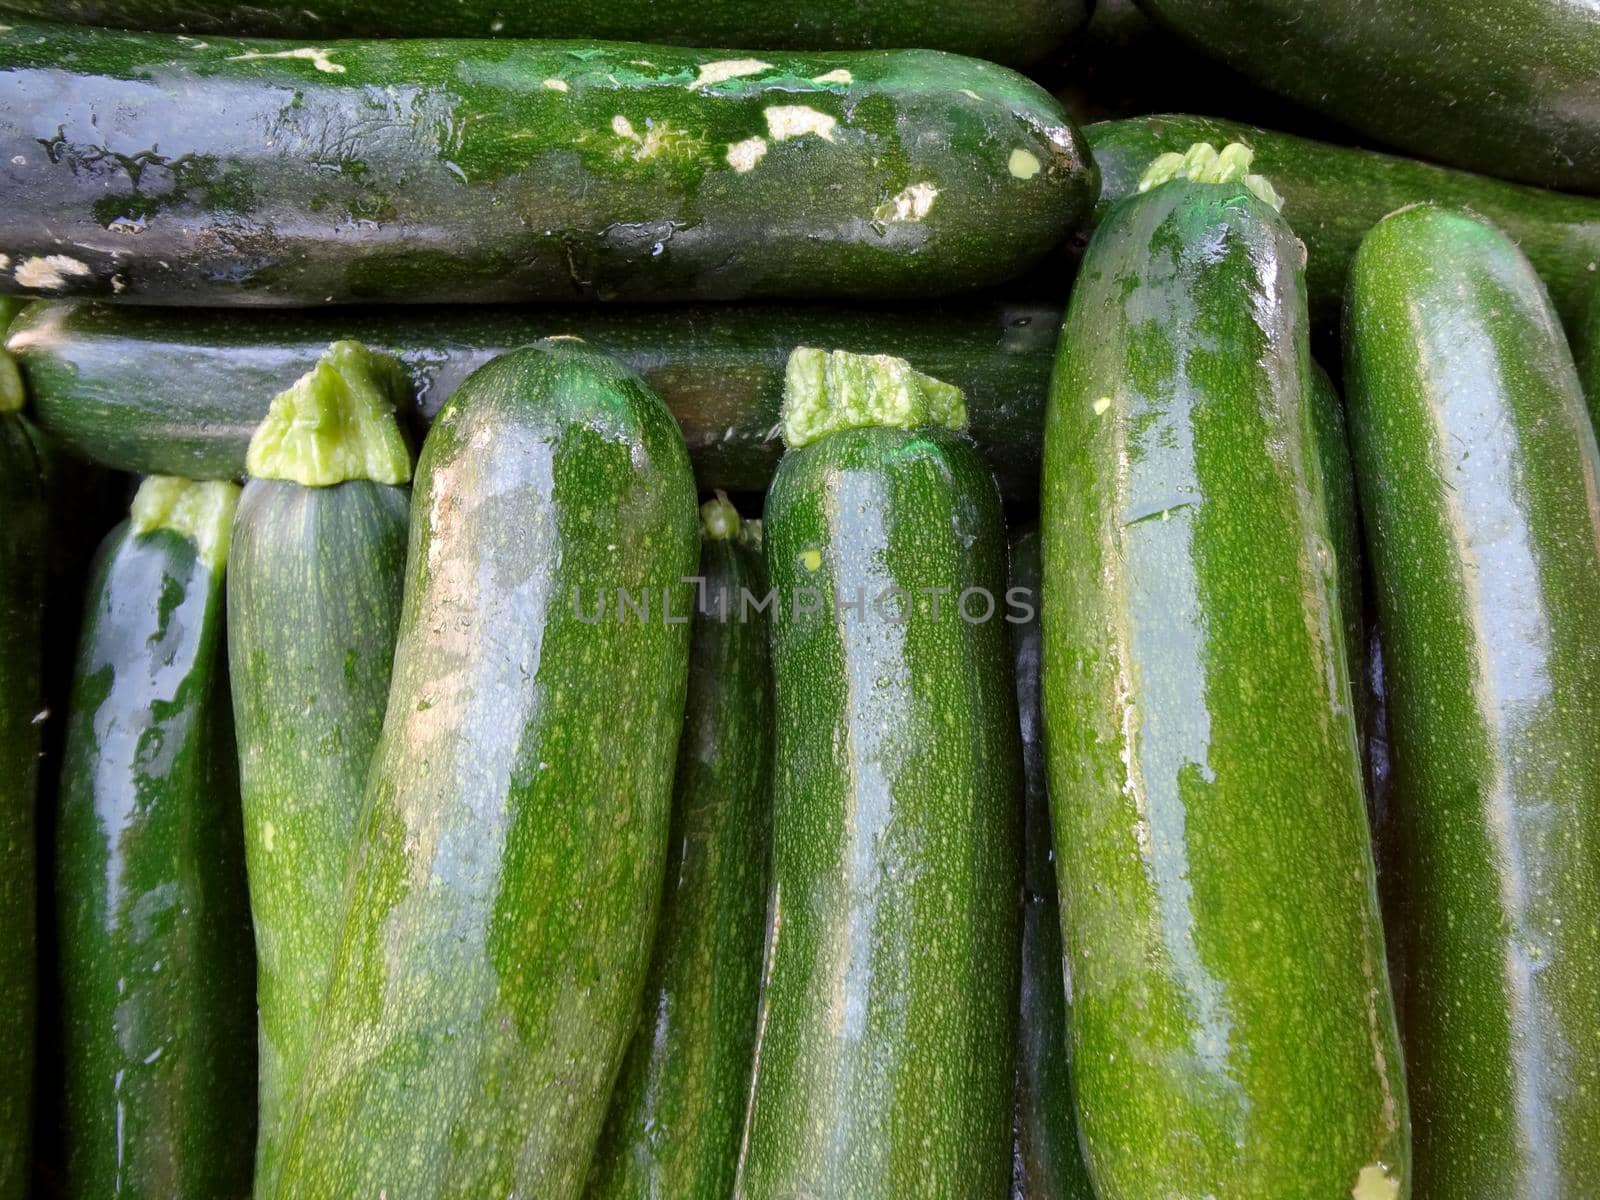 Zucchini for sale at Farmers Market by EricGBVD